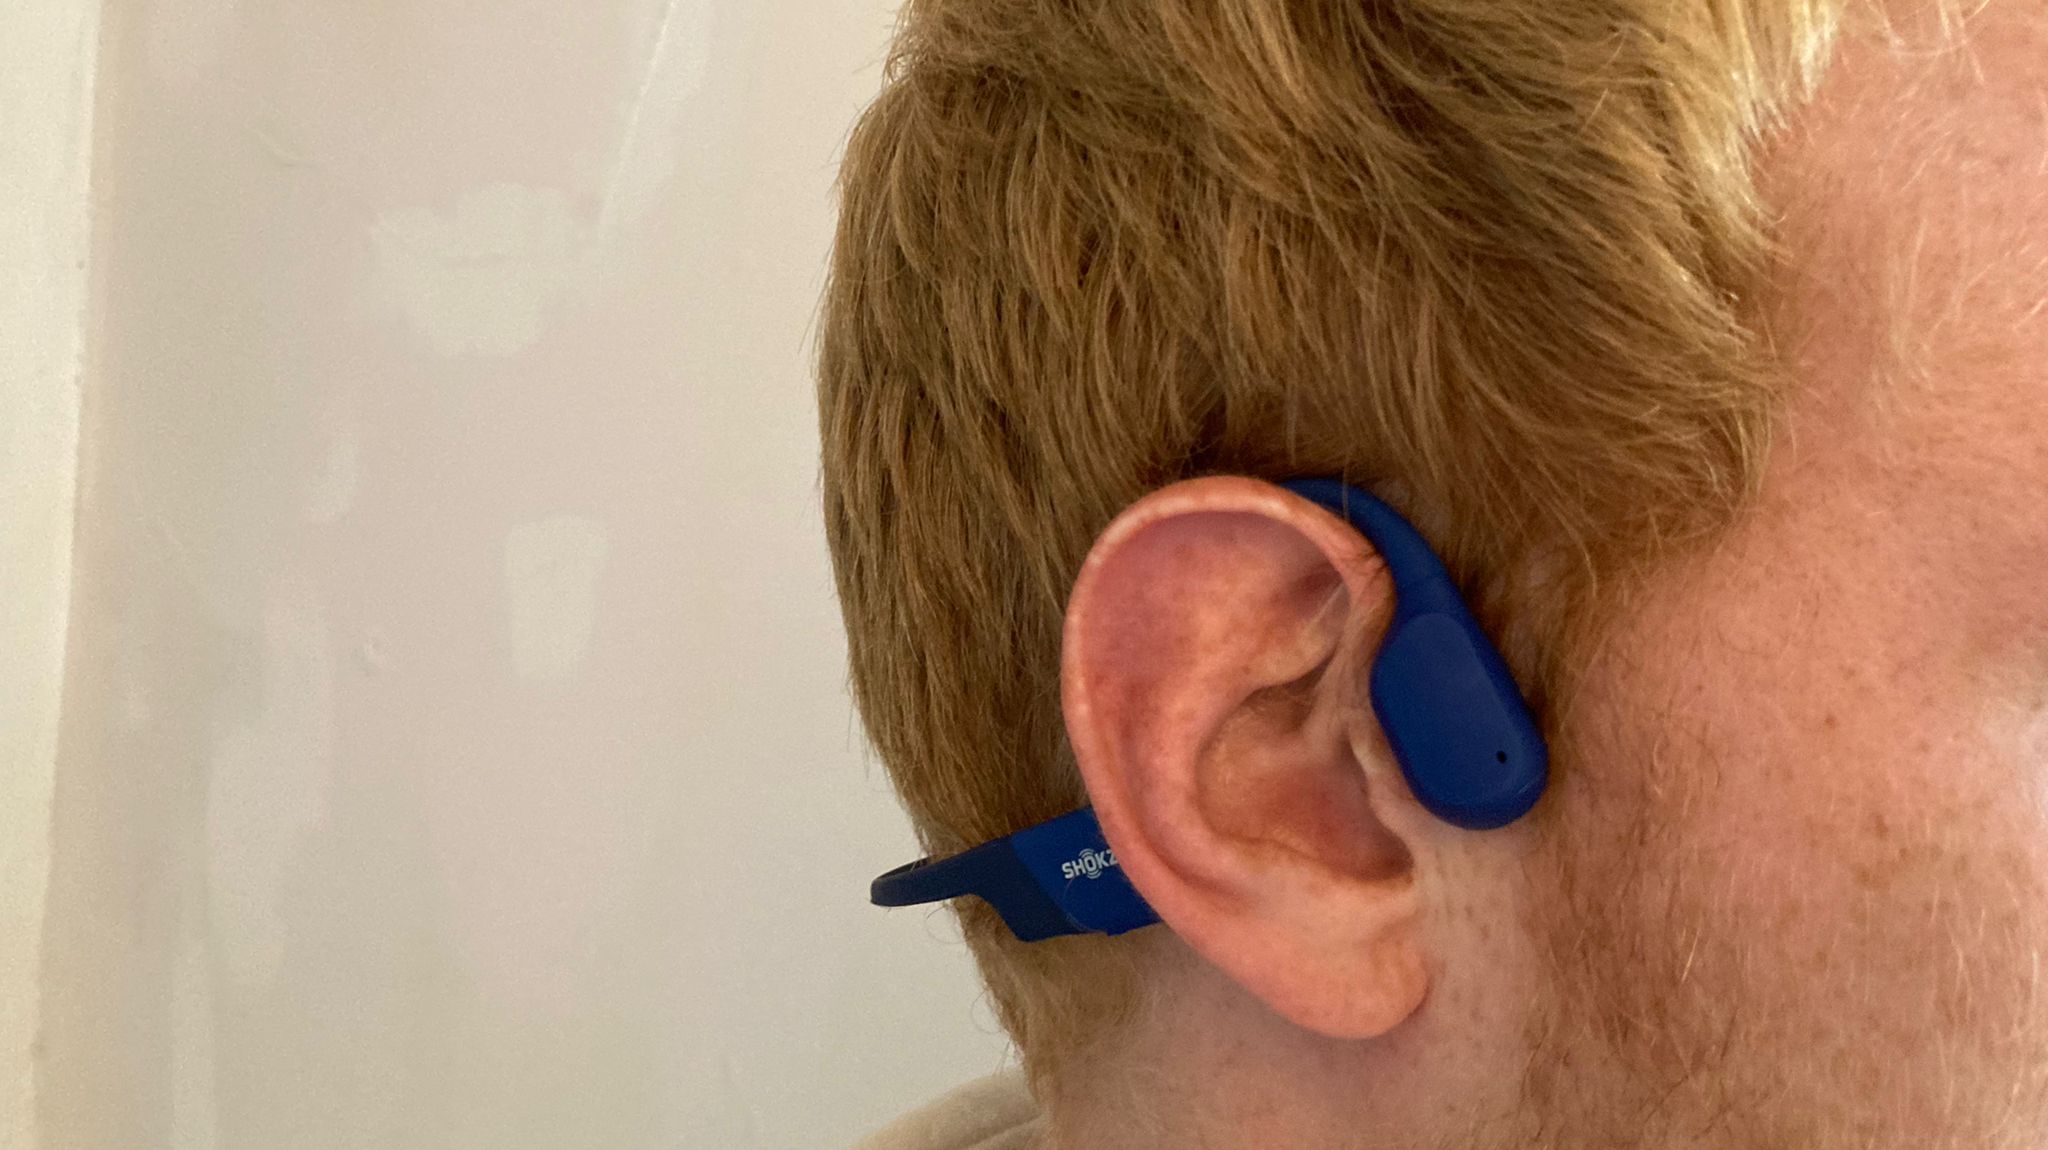 The Shokz OpenRun headphones tested by our Live Science fitness writer